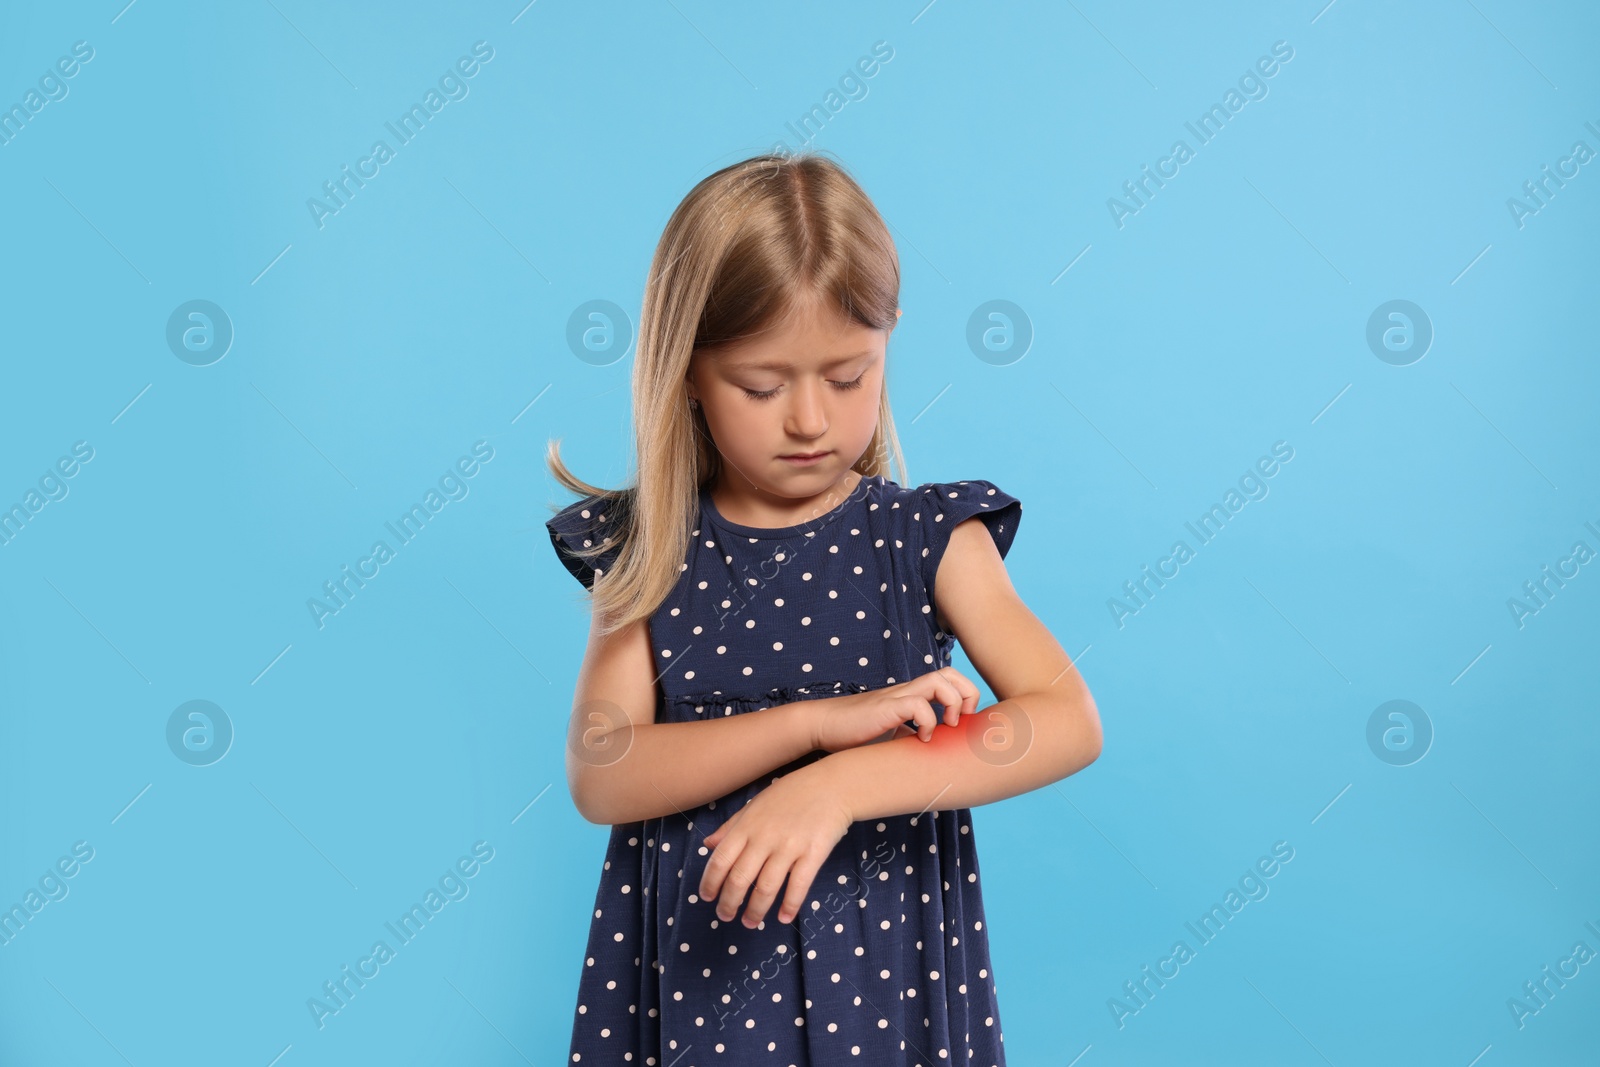 Photo of Suffering from allergy. Little girl scratching her arm on light blue background